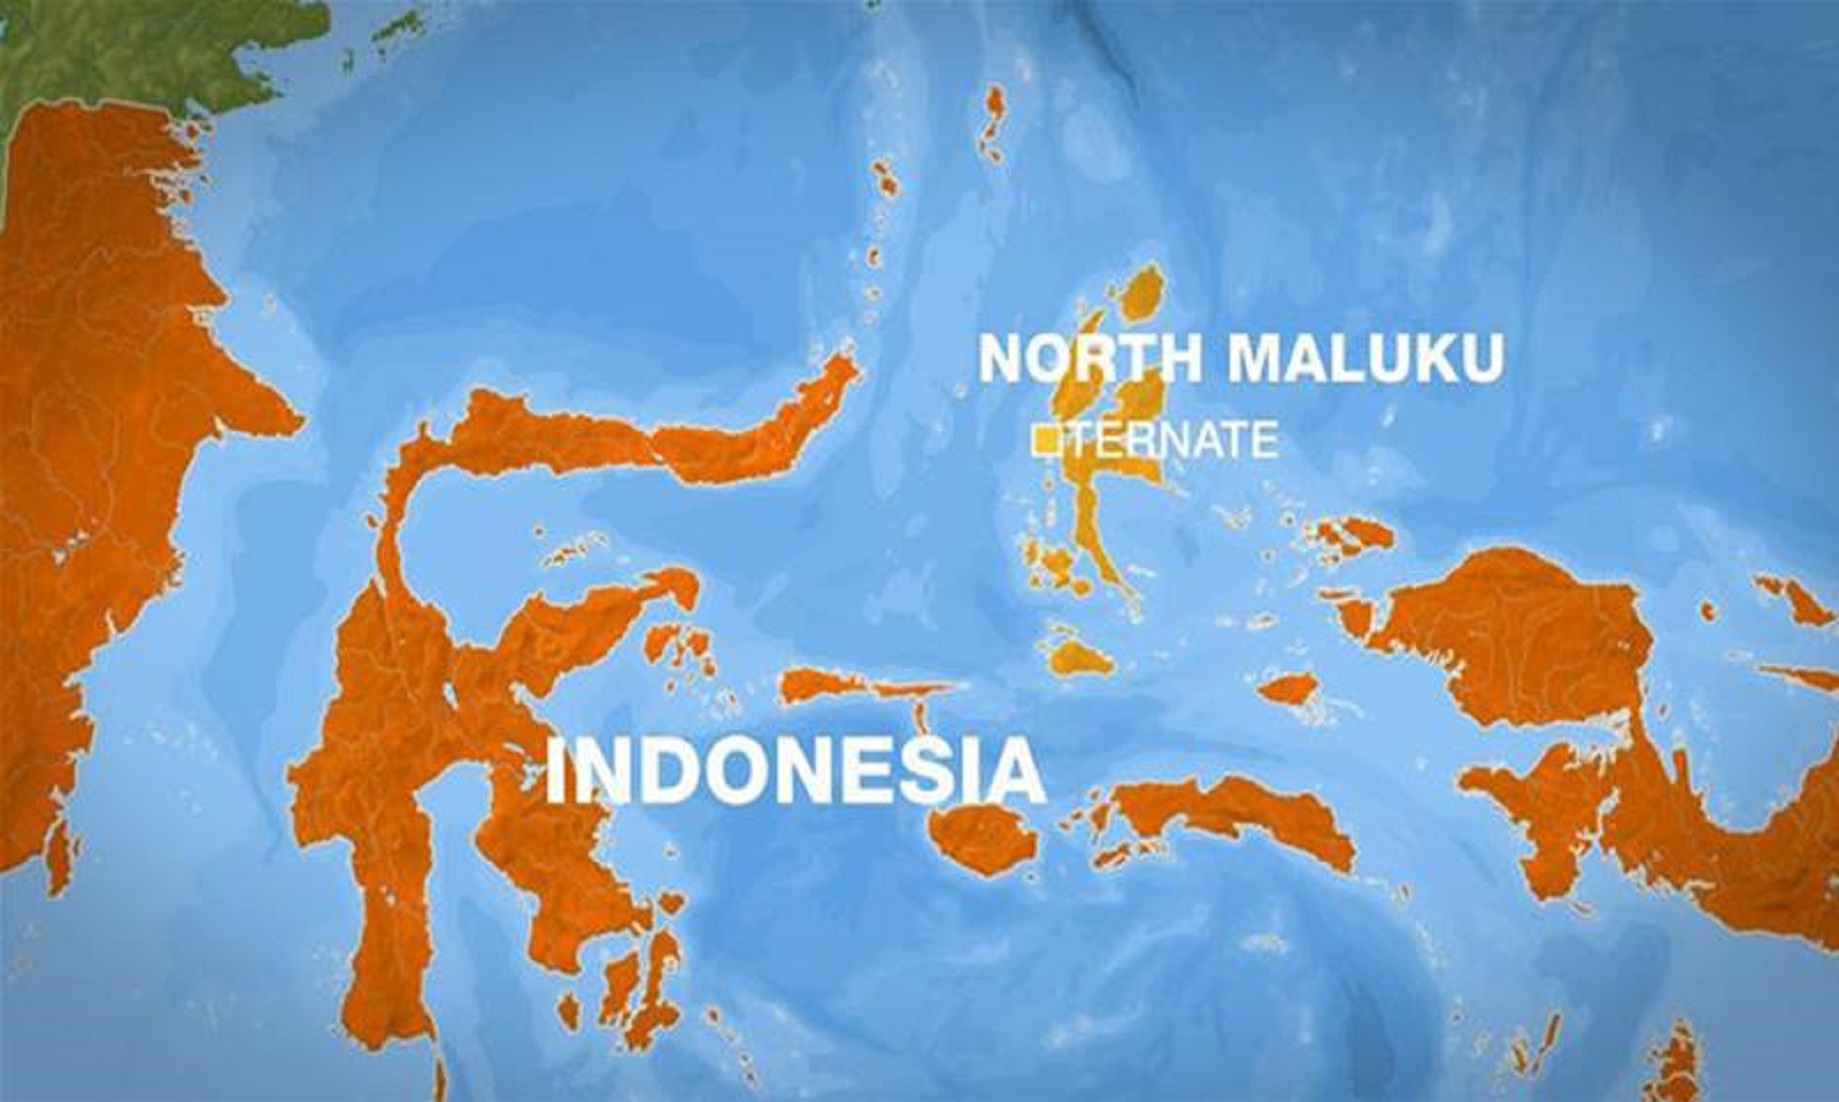 COVID-19 deaths in Indonesia exceed 100